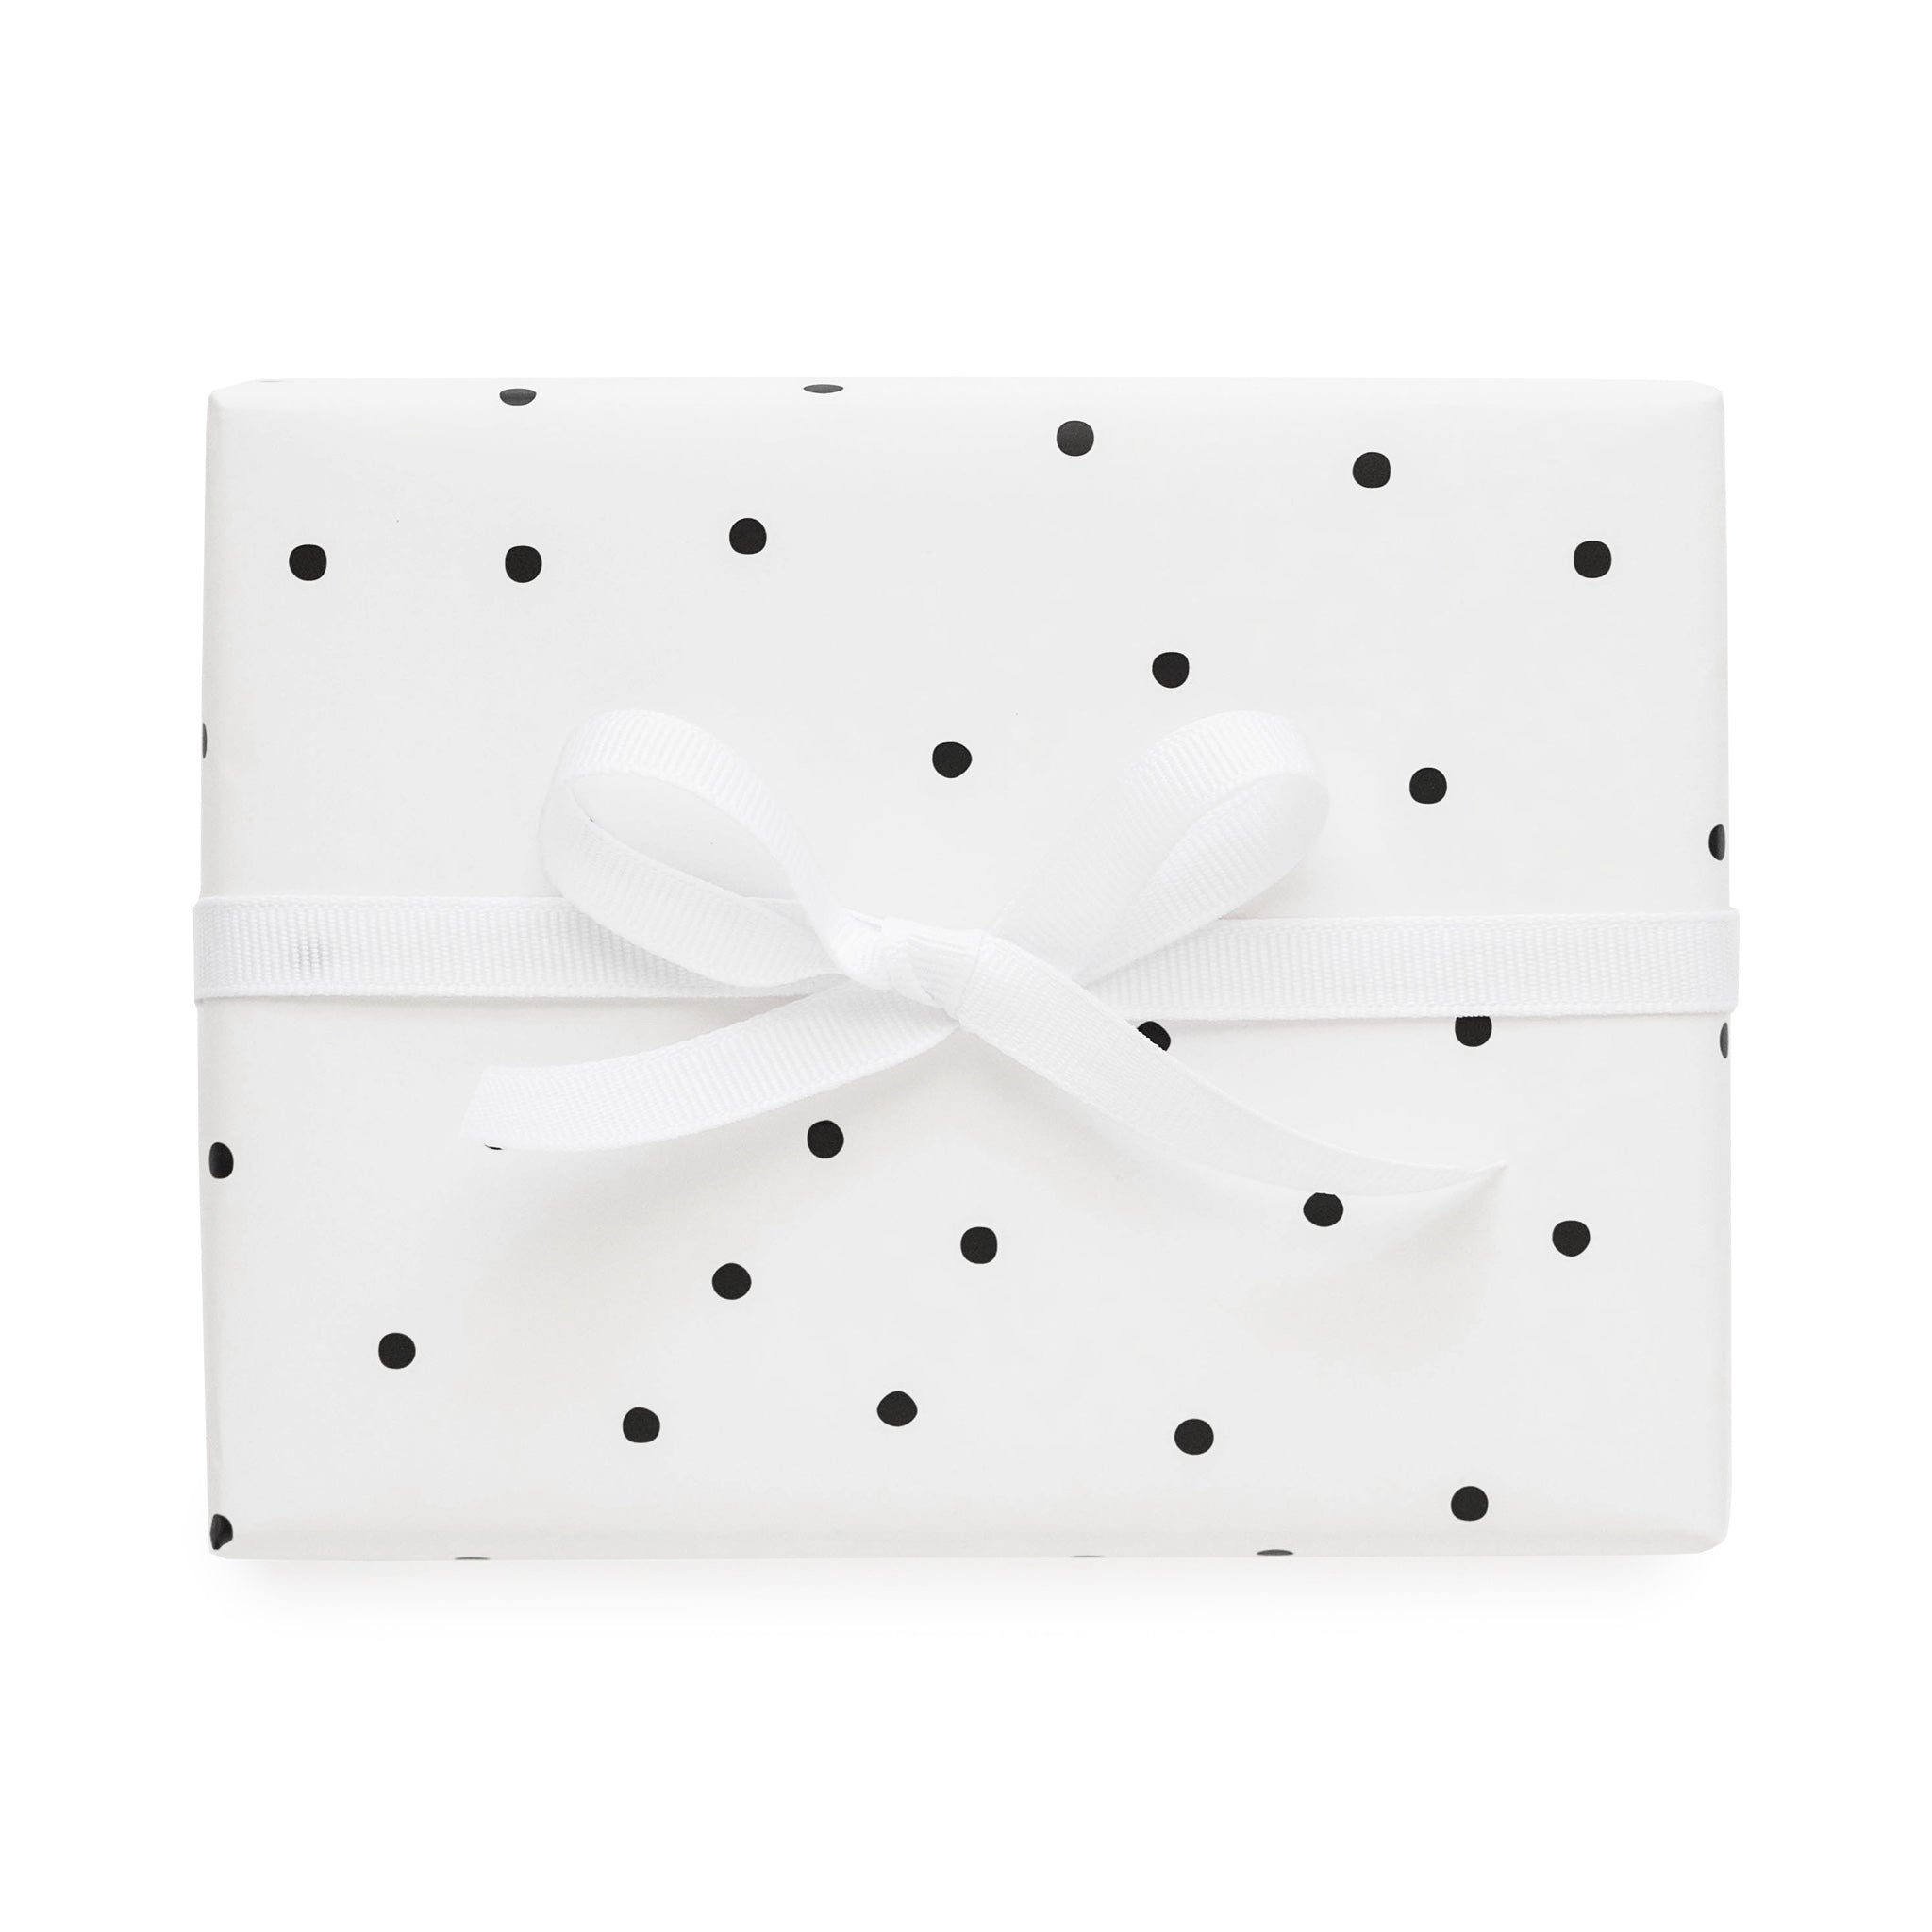 Mr. and Mrs. Wedding Black and White Premium Gift Wrap Wrapping Paper Roll